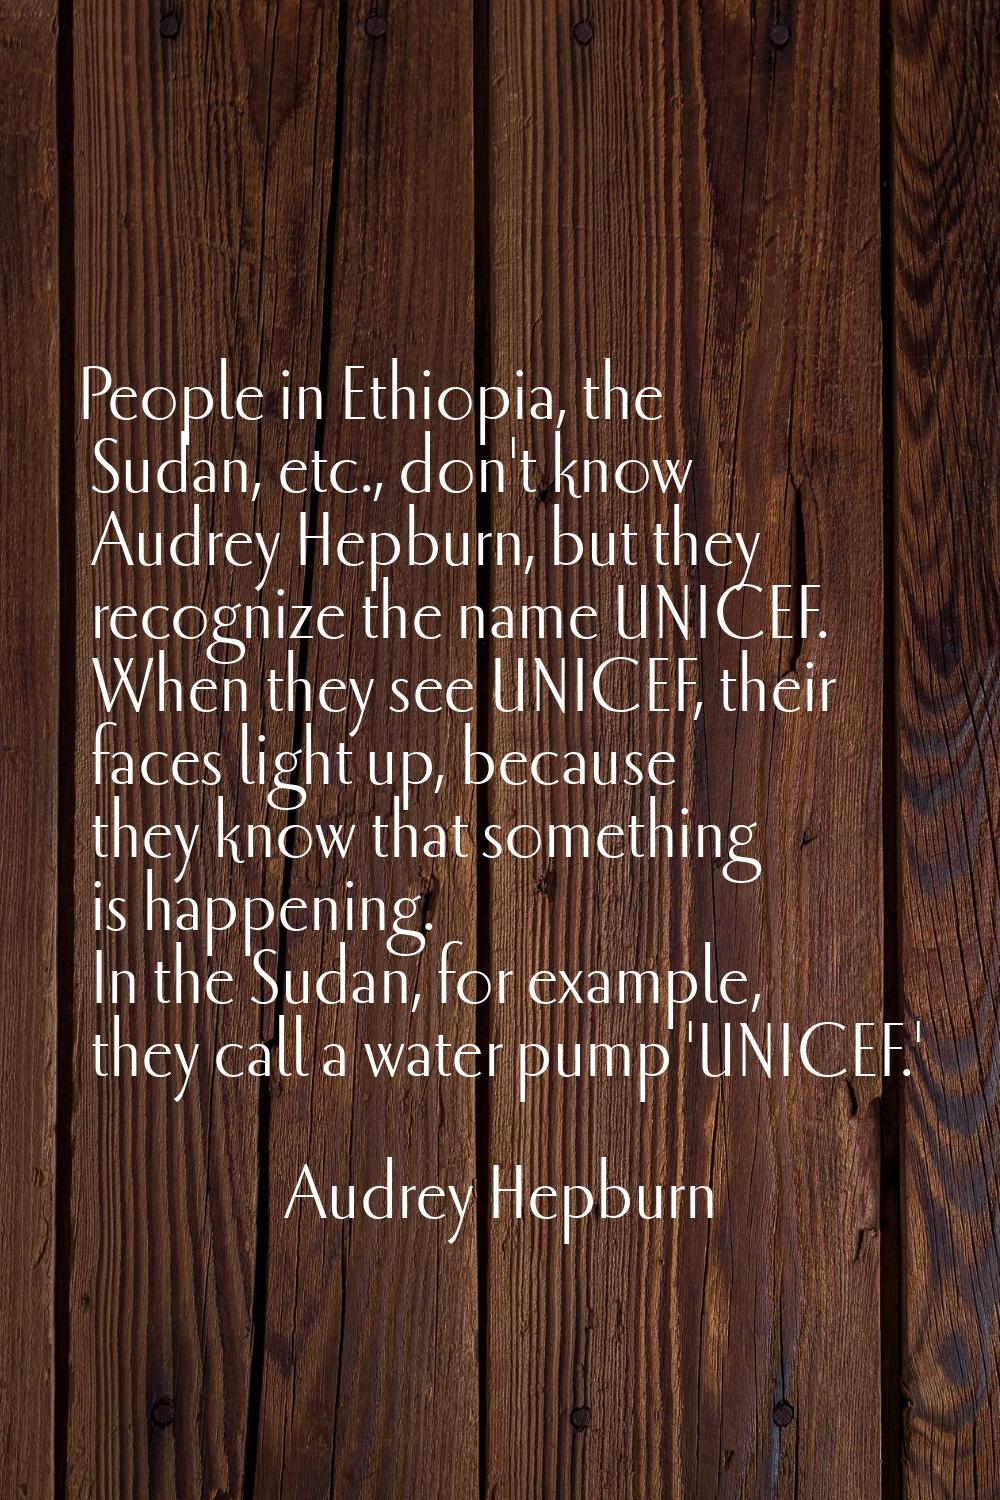 People in Ethiopia, the Sudan, etc., don't know Audrey Hepburn, but they recognize the name UNICEF.